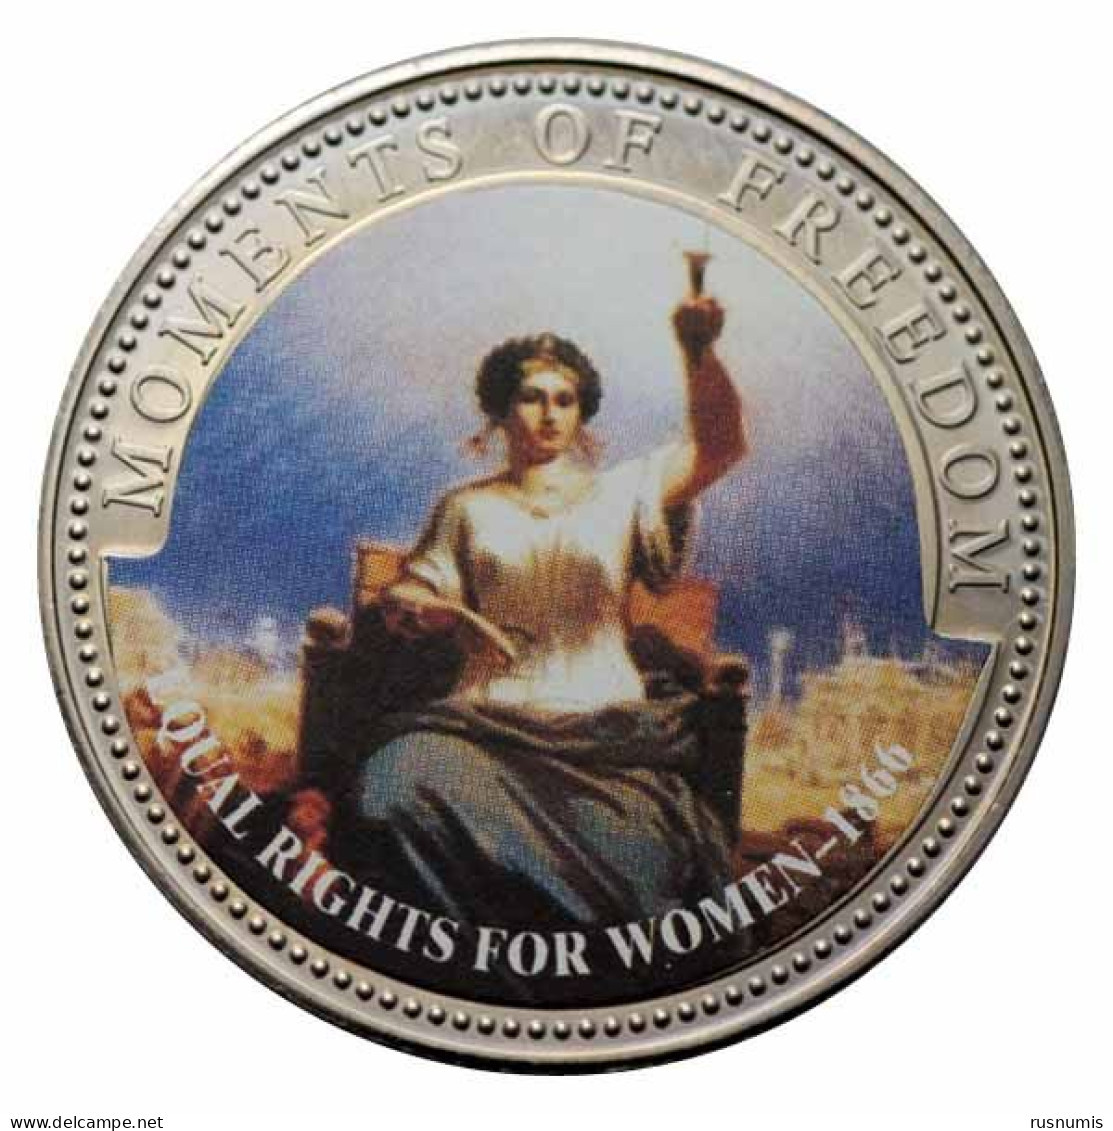 LIBERIA 10 DOLLARS MOMENTS OF FREEDOM - EQUAL RIGHTS FOR WOMAN 2001 - Liberia